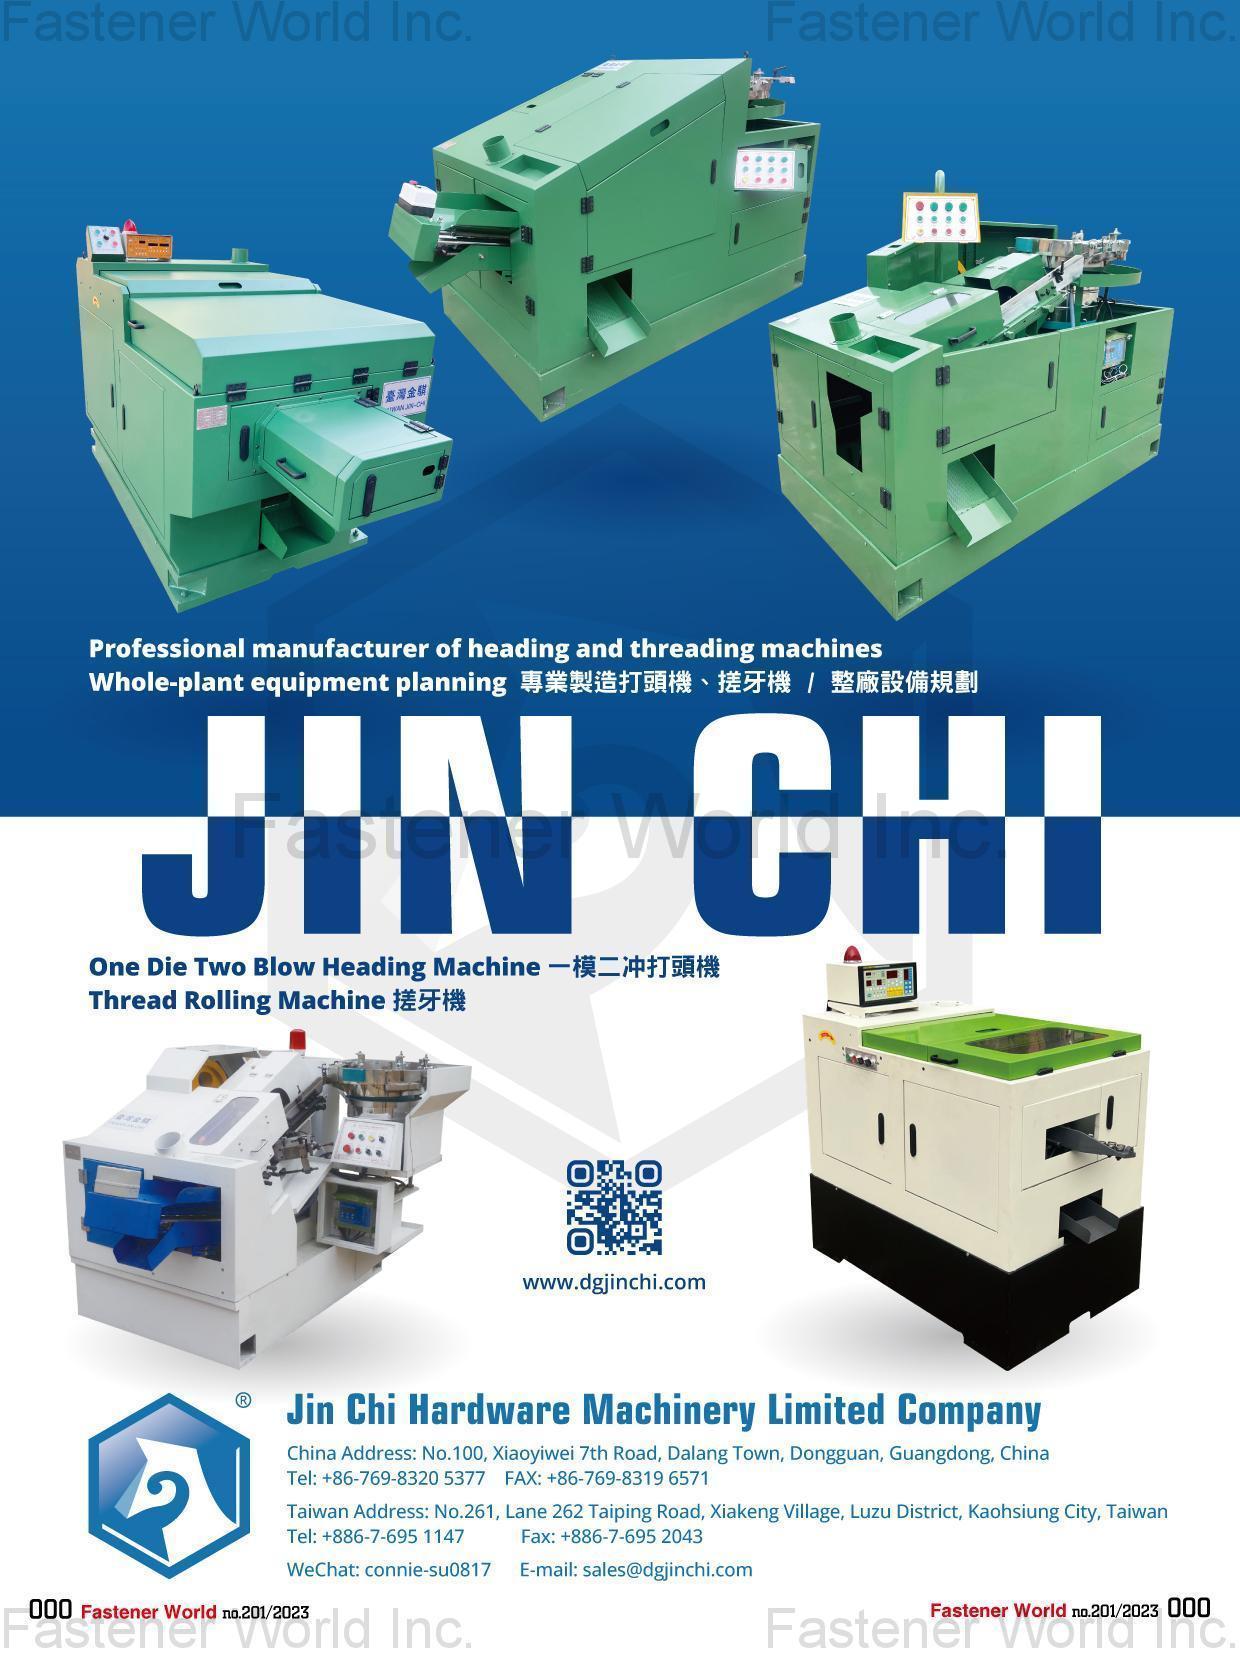 JIN CHI HARDWARE MACHINERY LIMITED COMPANY , Professional Manufacturer of Heading and Threading Machines Whole-plant Equipment Planning One Die Two Blow Heading Machine Thread Rolling Machine